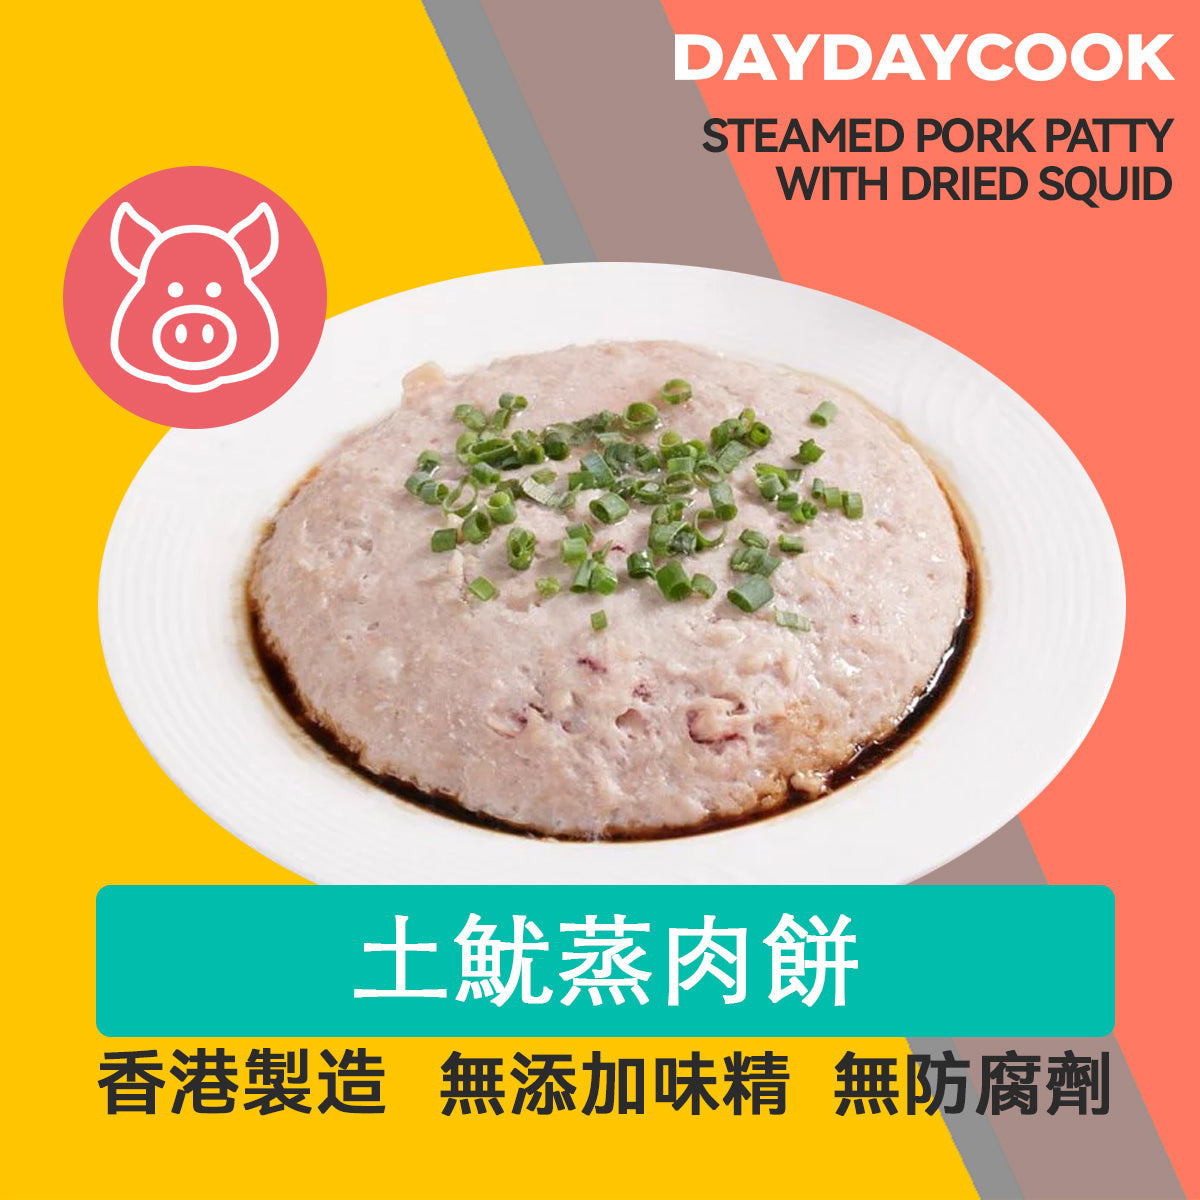 Steamed Pork Patty with Dried Squid